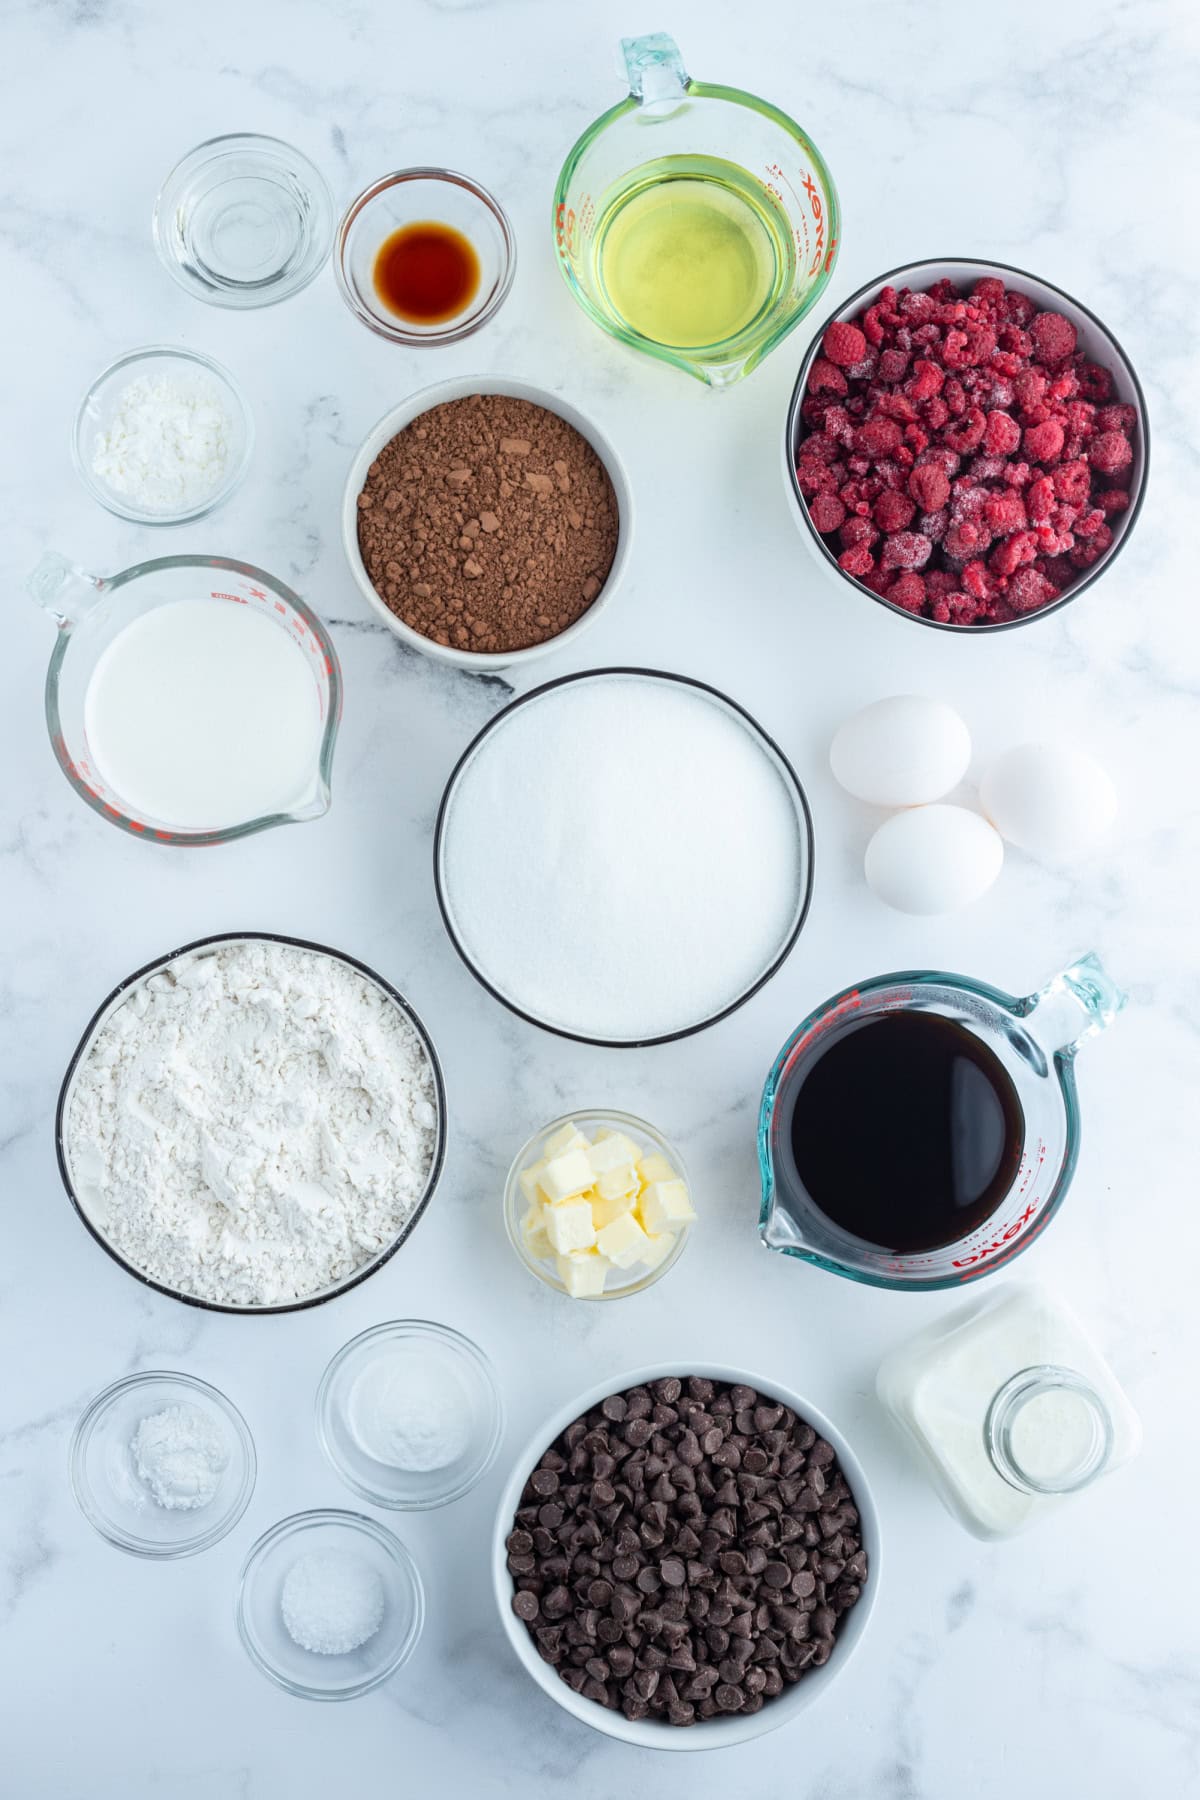 ingredients displayed for making double chocolate cake with raspberry filling